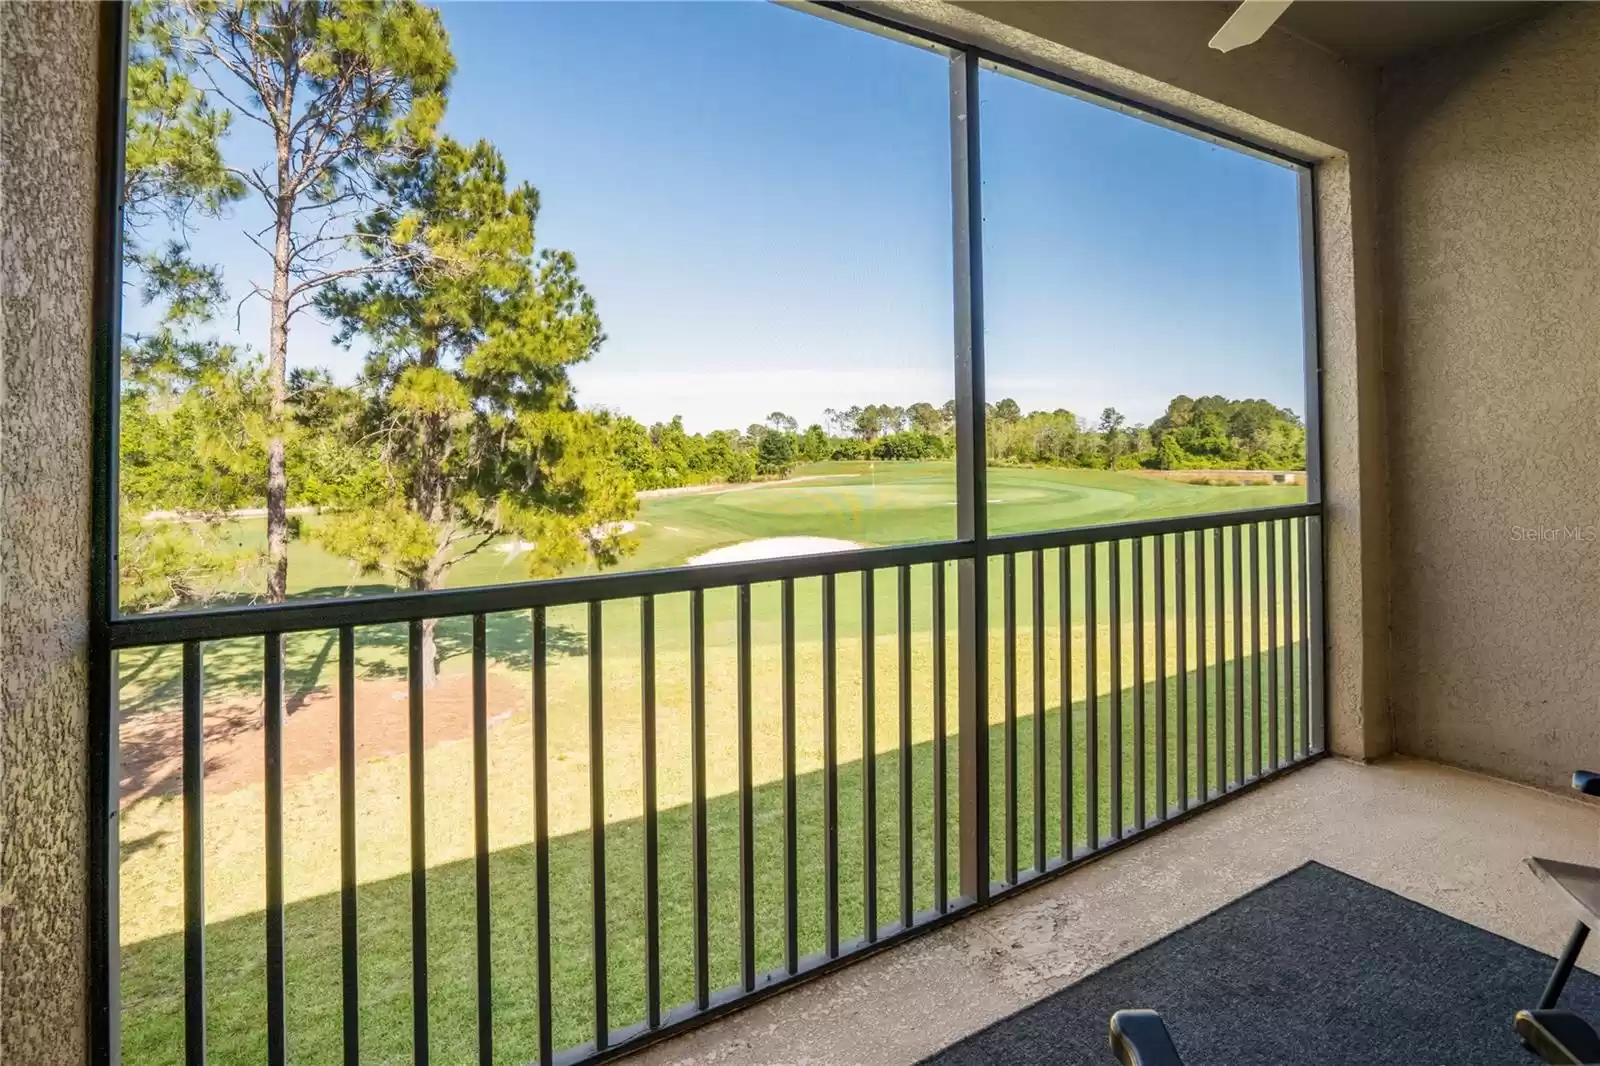 Great screened patio with amazing views